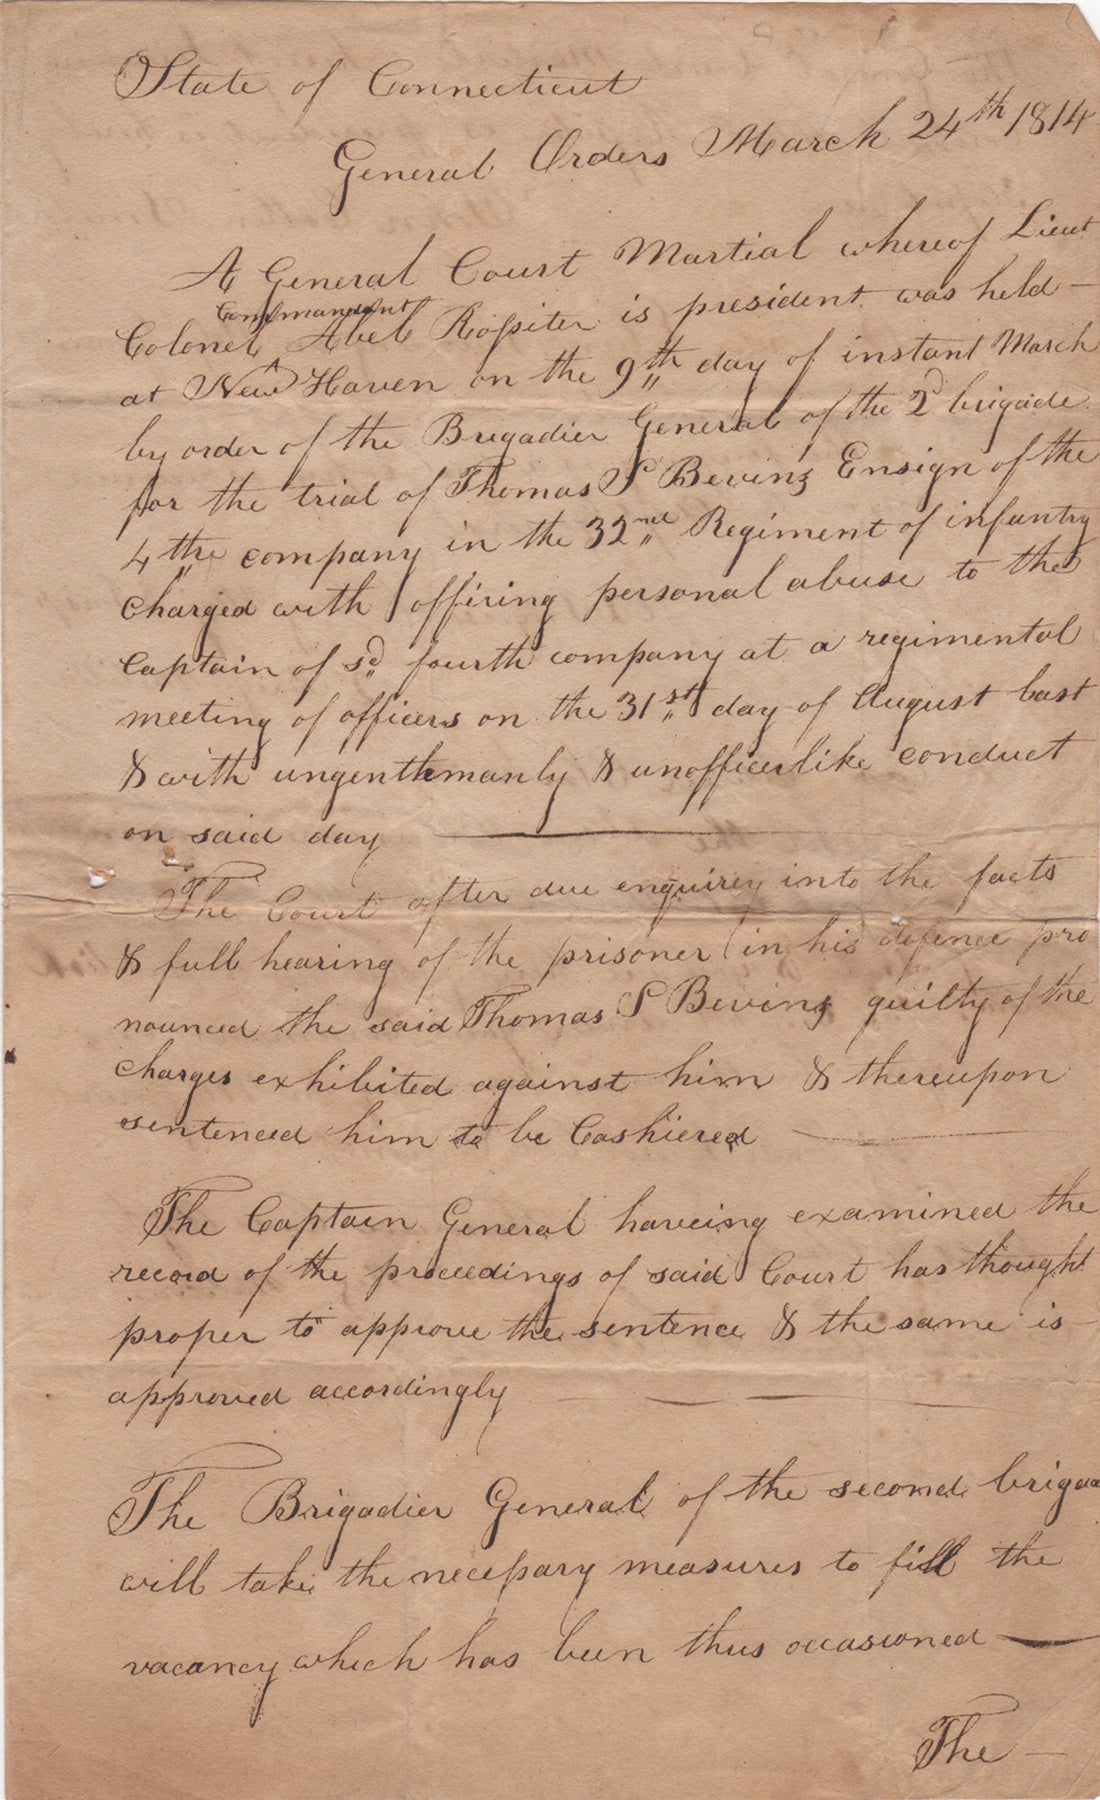 [War of 1812. Connecticut. Law] - [Manuscript Document Signed] [Court Martial of Thomas Bevins] State of Connecticut. General Orders March 24th 1814